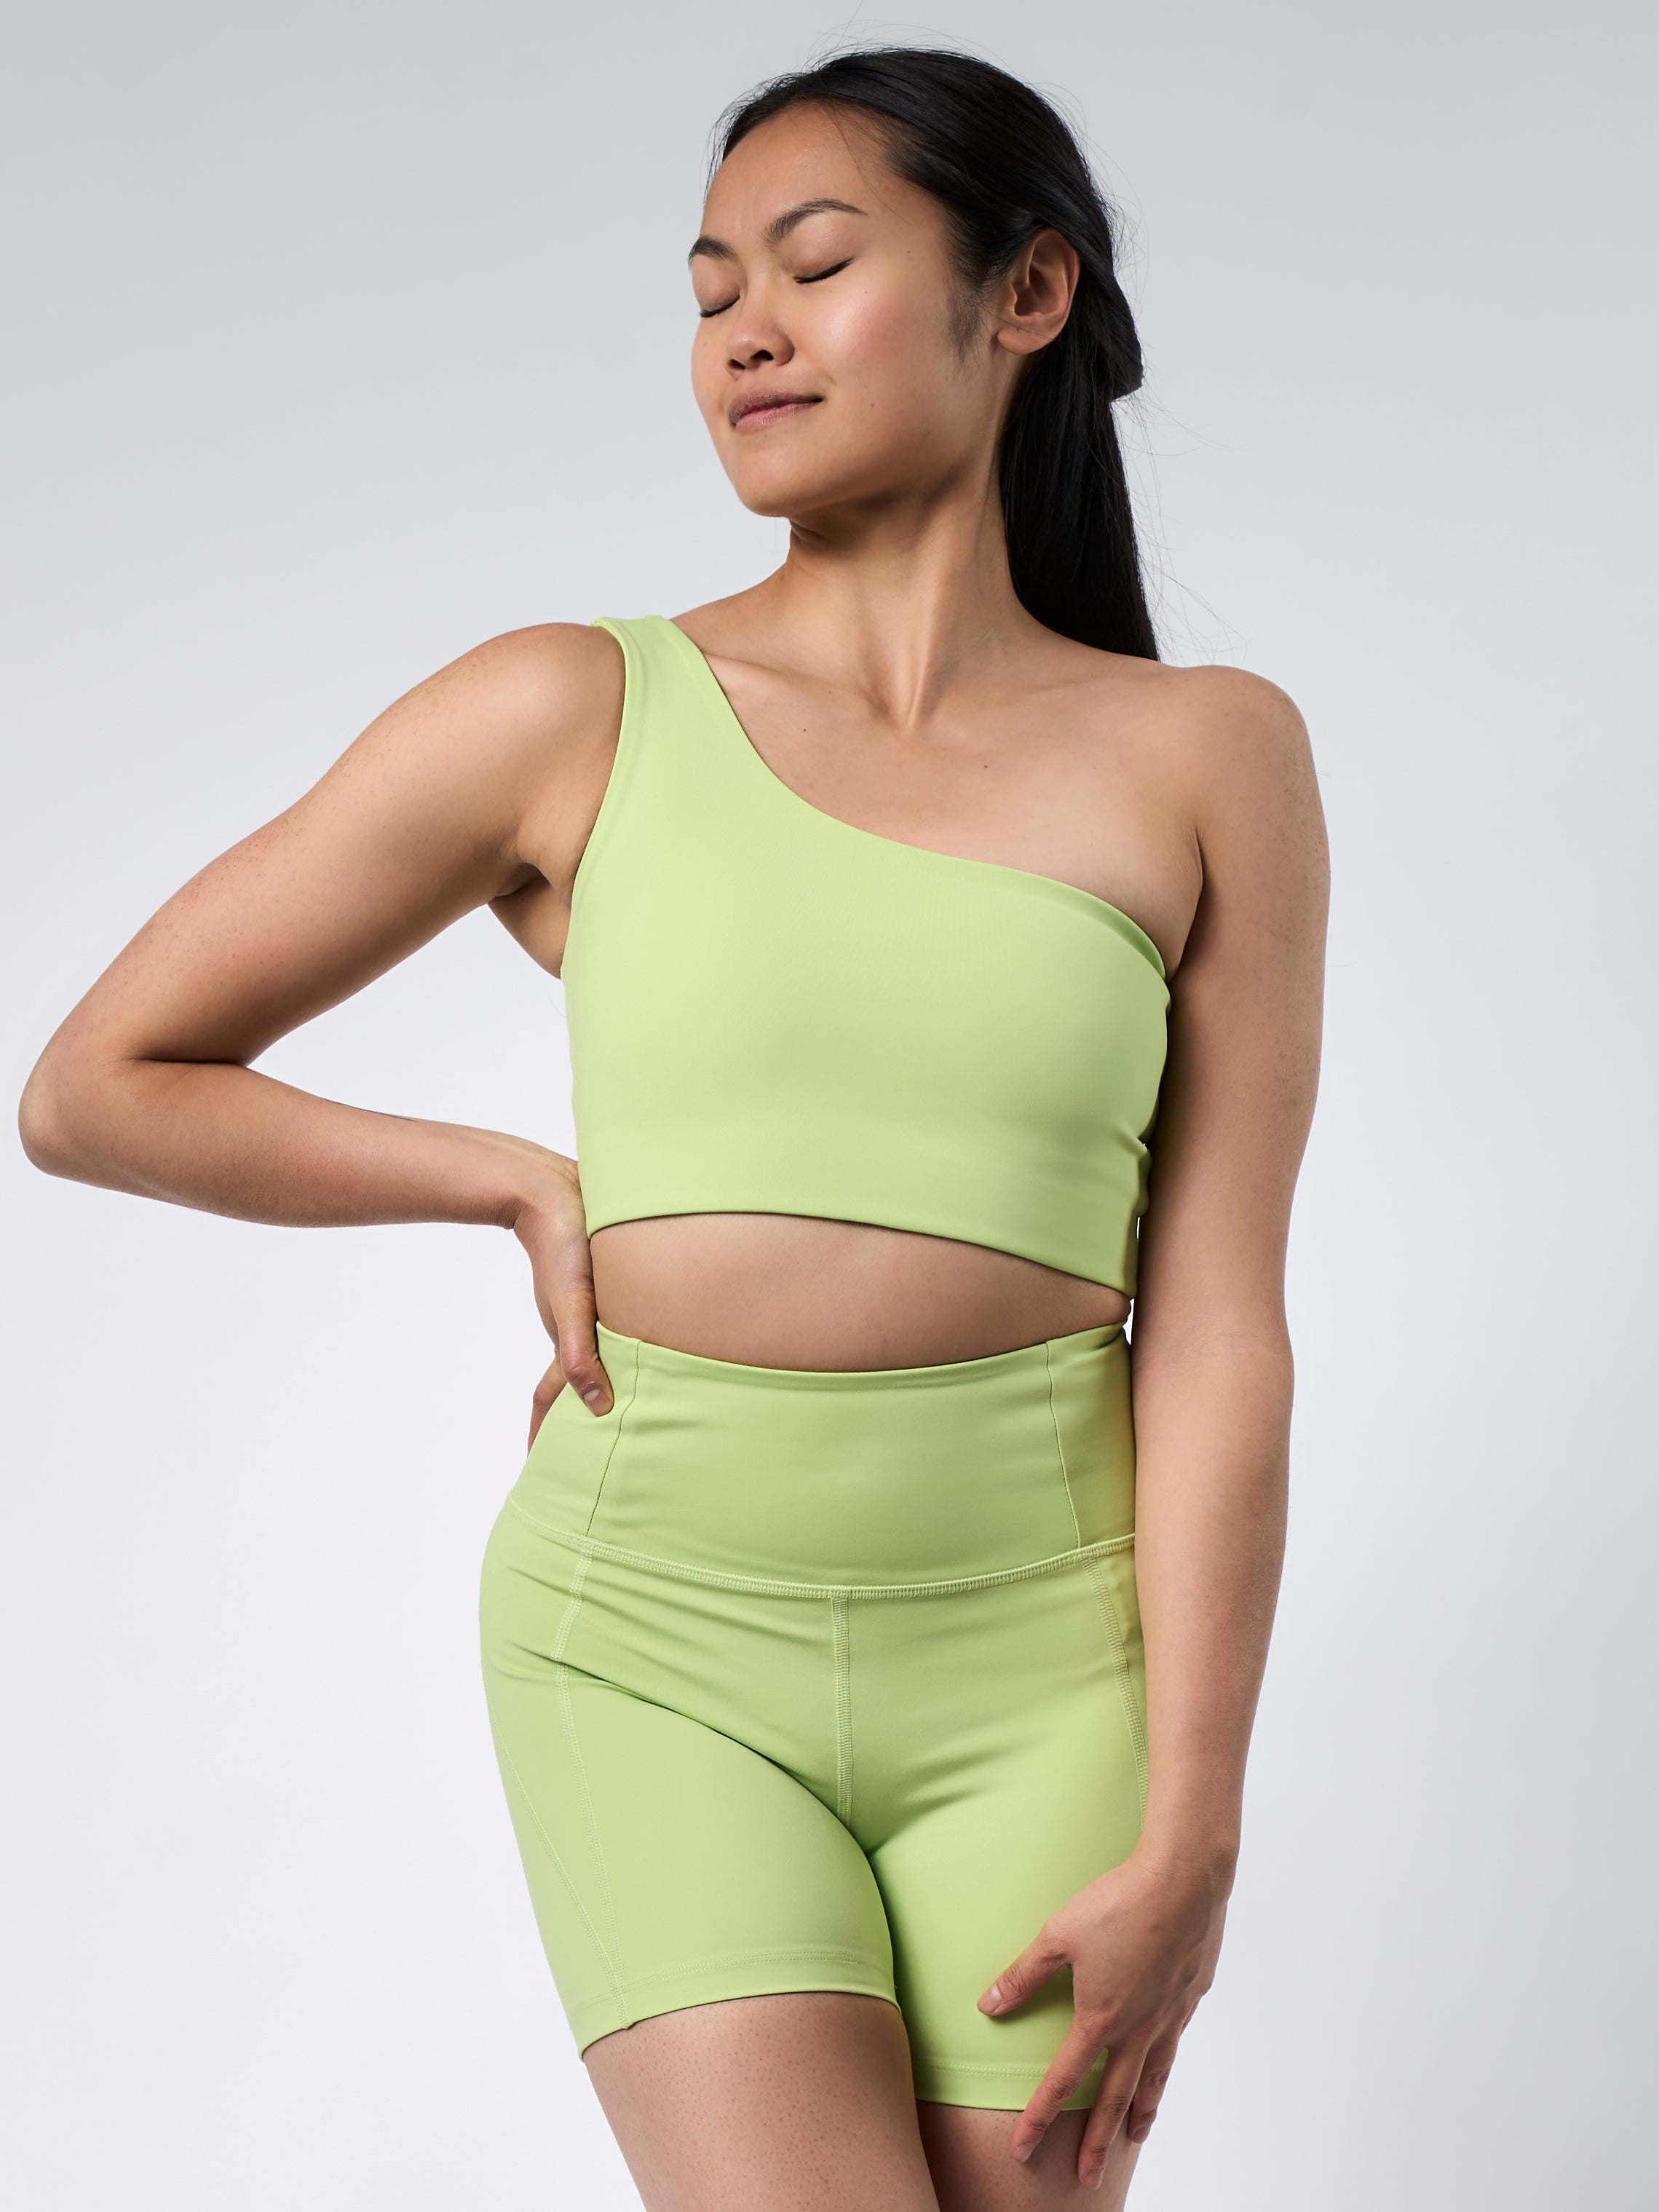 Girlfriend Collective Bianca Bra in Key Lime